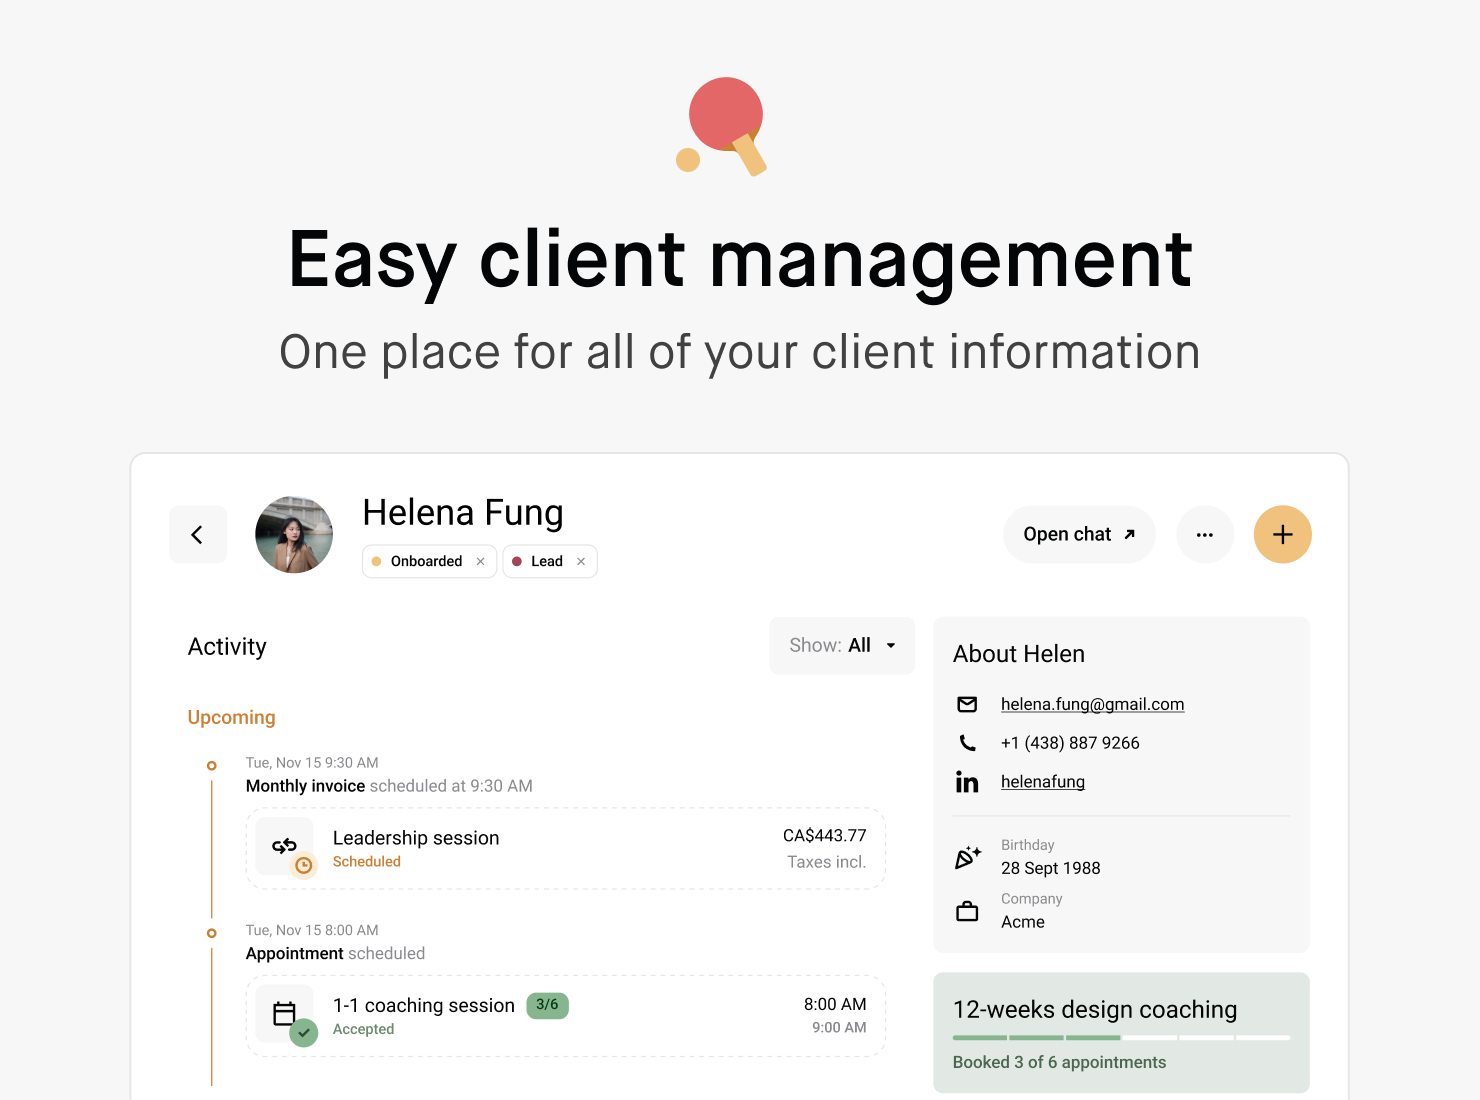 Practice Software - Easily manage your entire client relationships